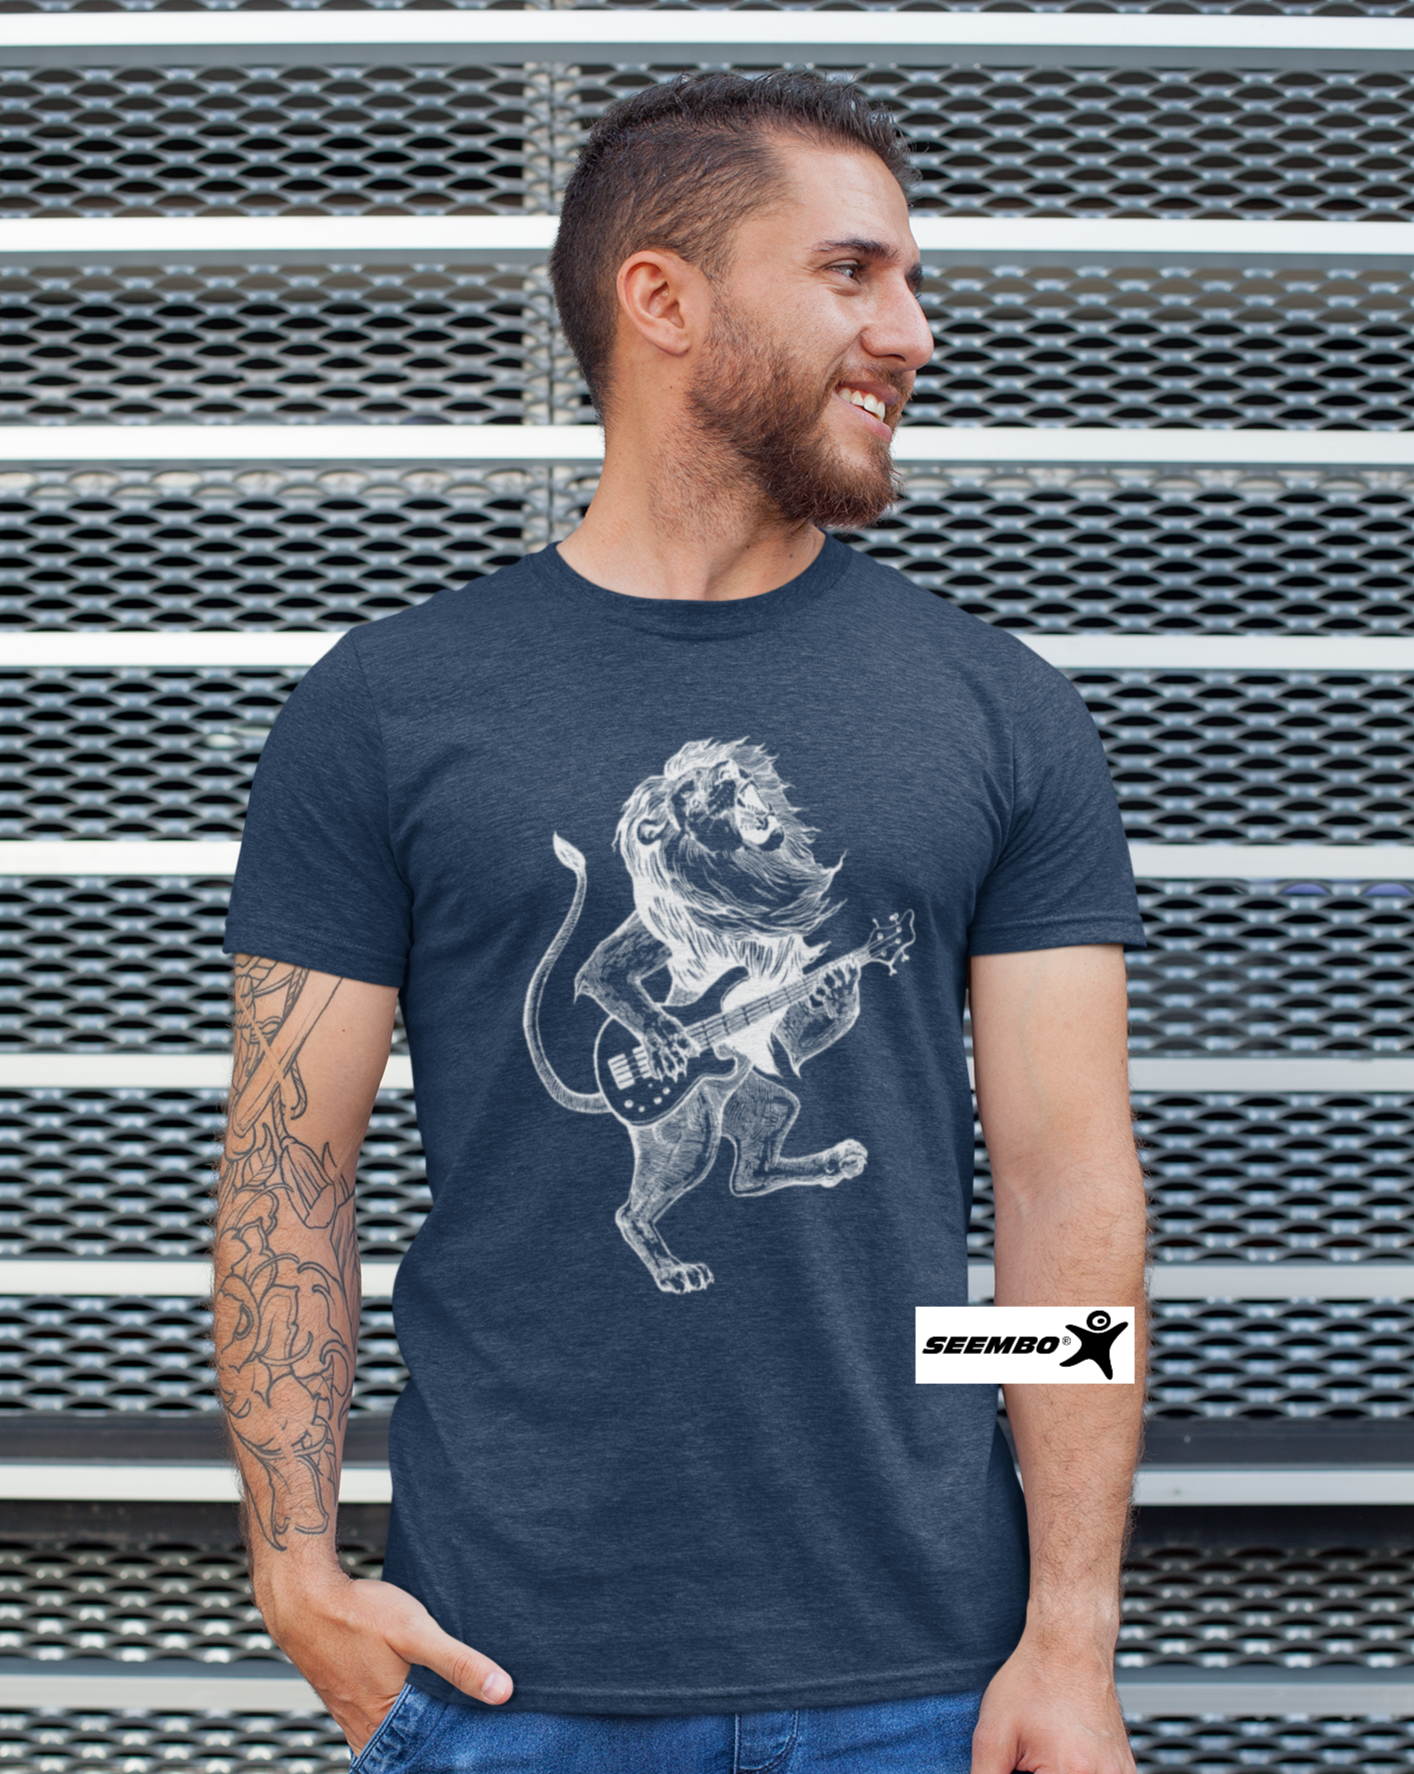 a-man-with-seembo-t-shirt-with-lion-playing-guitar-guitarist-art-in-a-vintage-navy-color